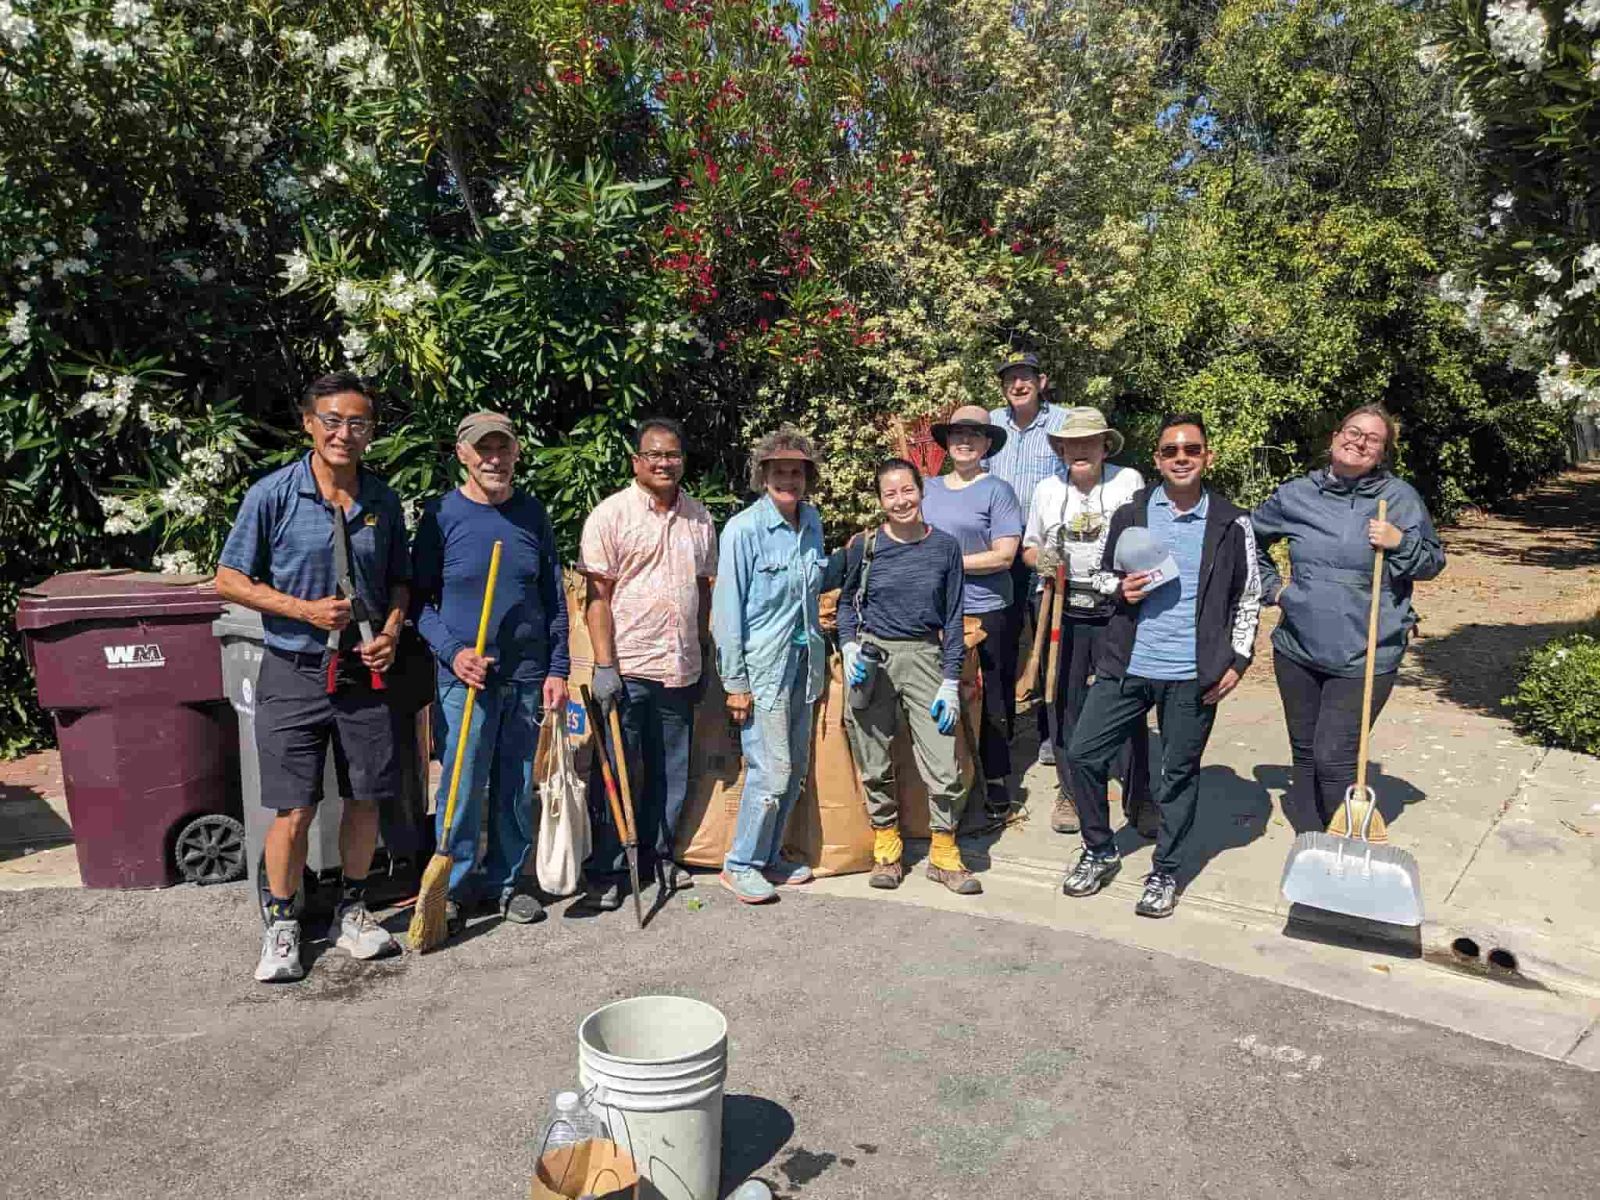 Claremont Club and Spa. Ten volunteers after a workday holding rakes and hand pruners.